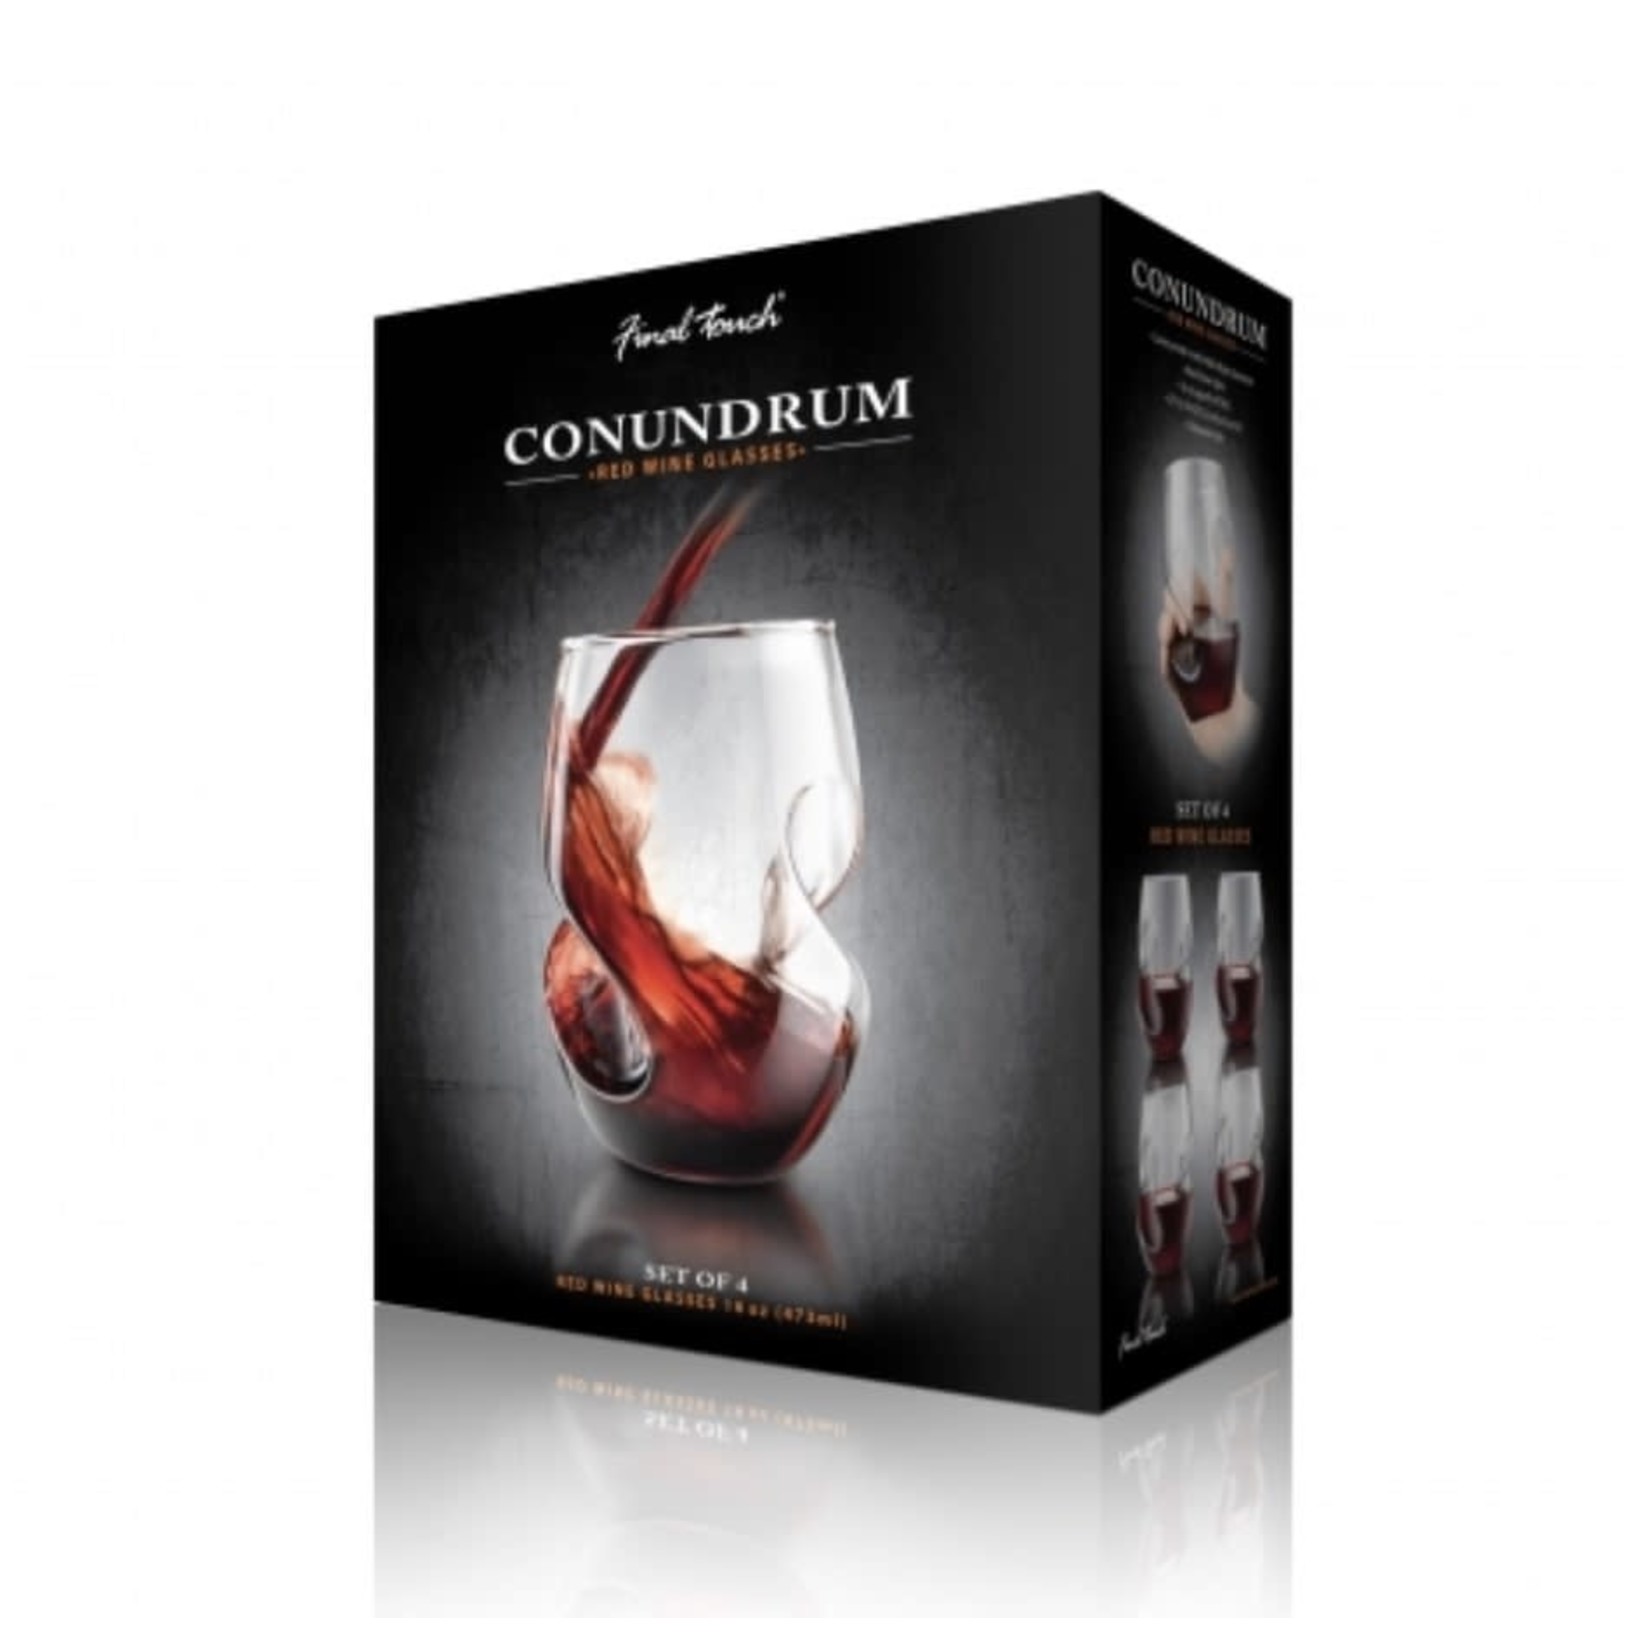 FINAL TOUCH FINAL TOUCH Conundrum Red Wine Glasses S/4